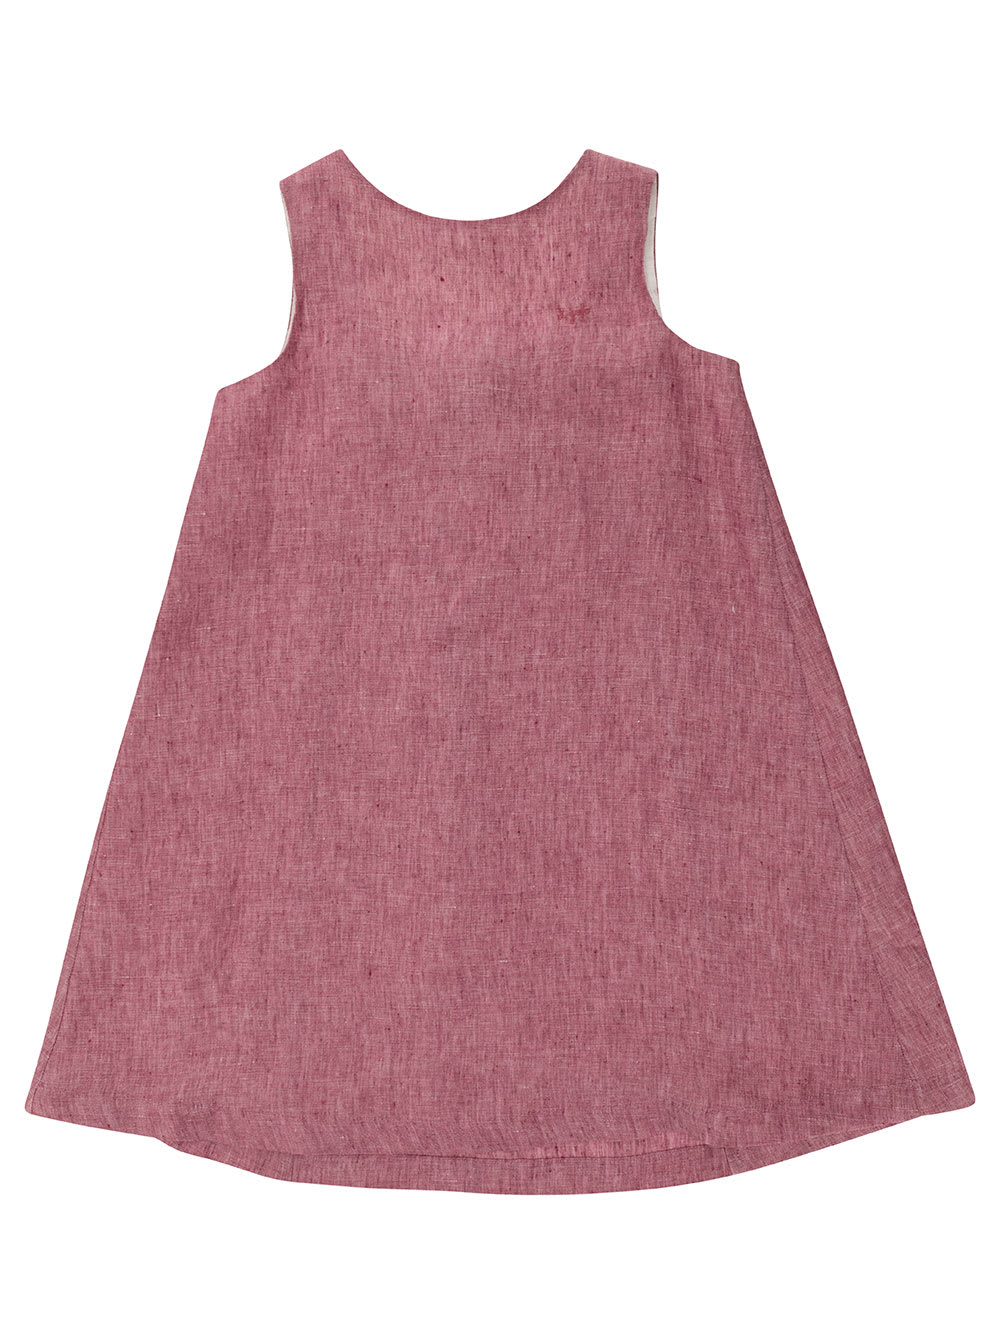 IL GUFO PINK CREWNECK DRESS WITH LOGO EMBROIDERY IN LINEN GIRL